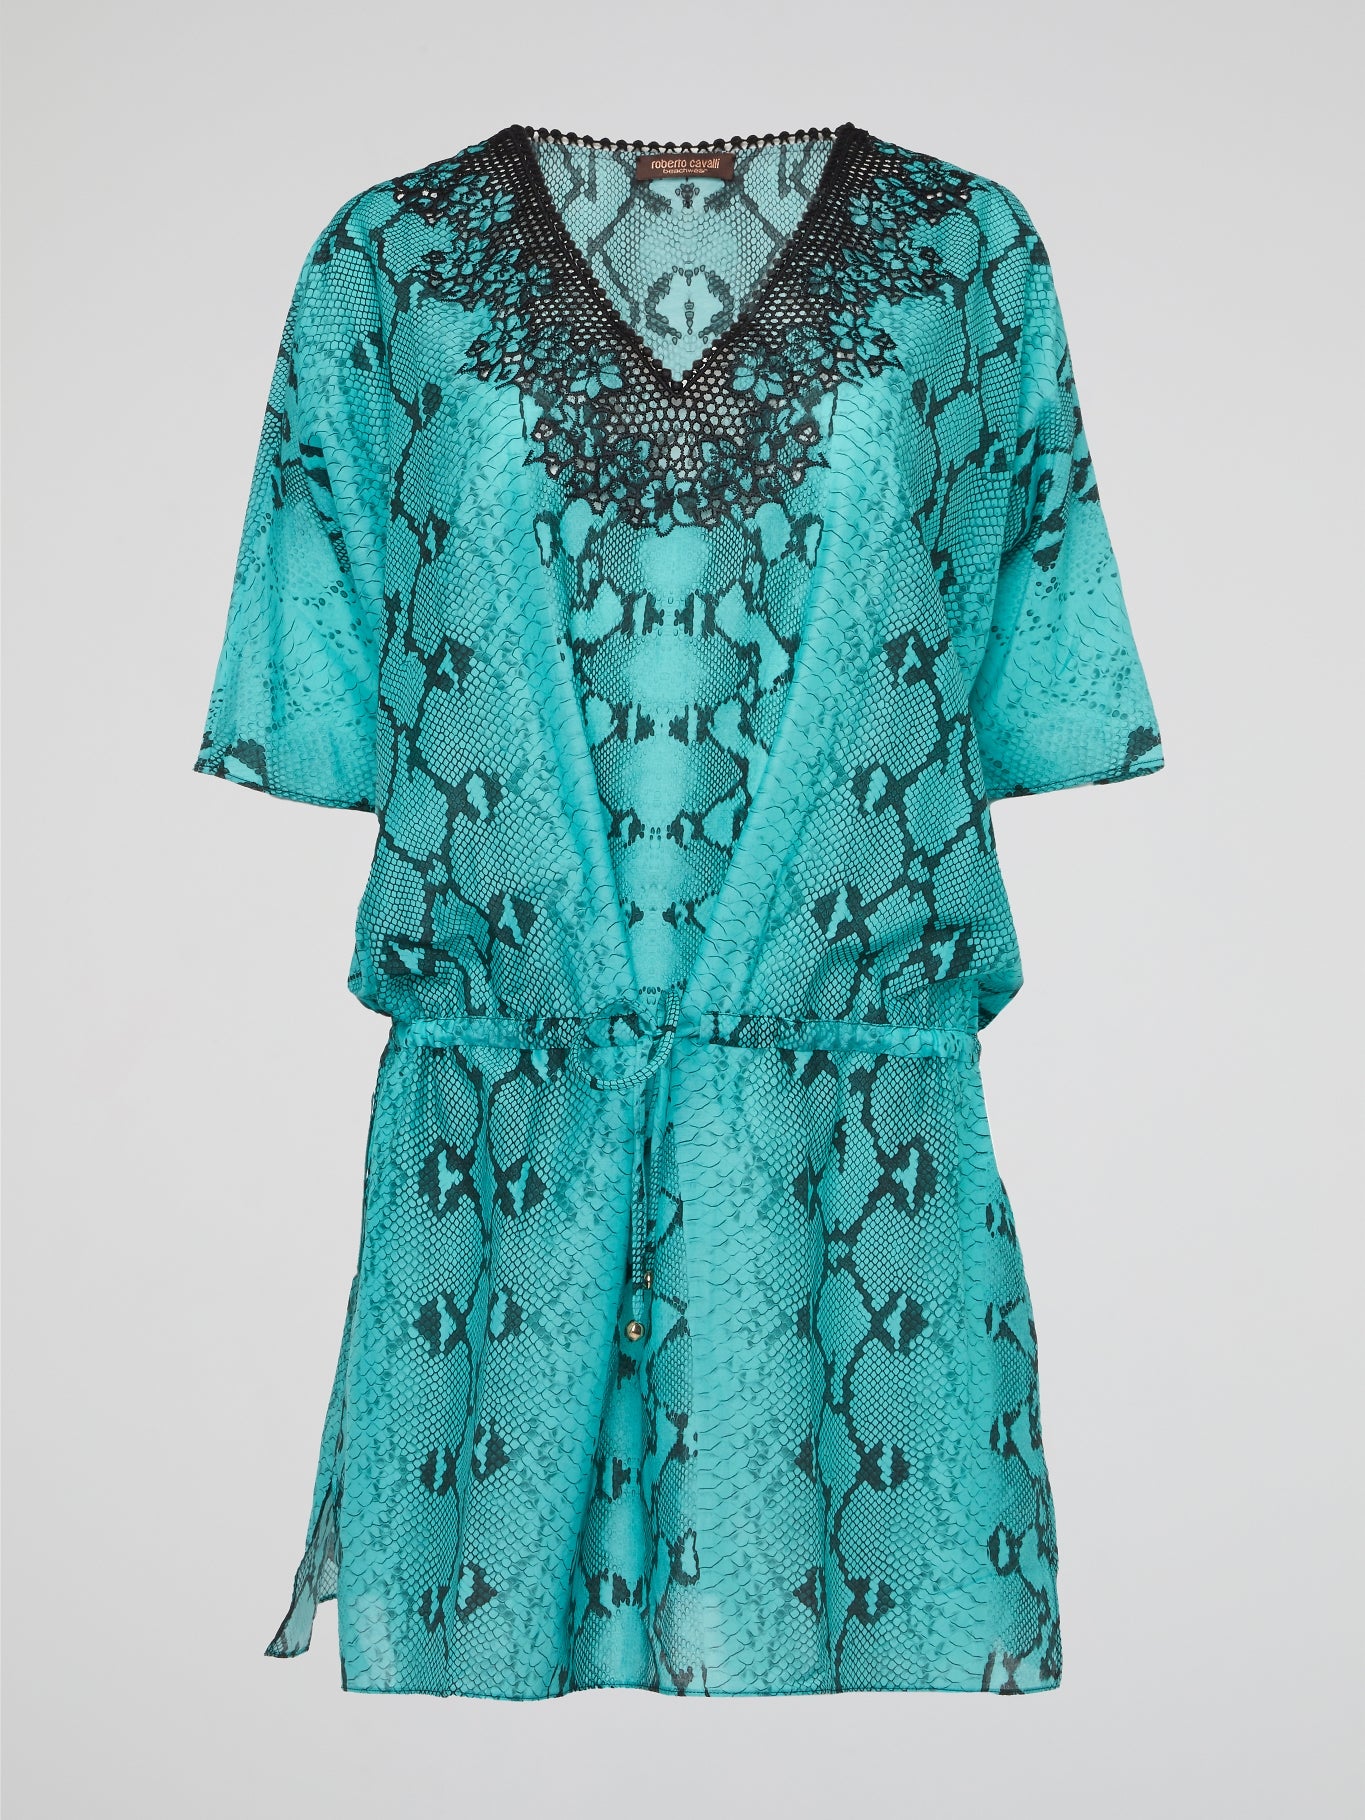 Embrace your wild side with the luxurious Green Snake Print Kaftan by Roberto Cavalli. This stunning piece will make you feel like a tropical goddess, with its flowing silhouette and eye-catching snake print design. Perfect for lounging by the pool or making a statement at a beach party, this kaftan is sure to turn heads wherever you go.